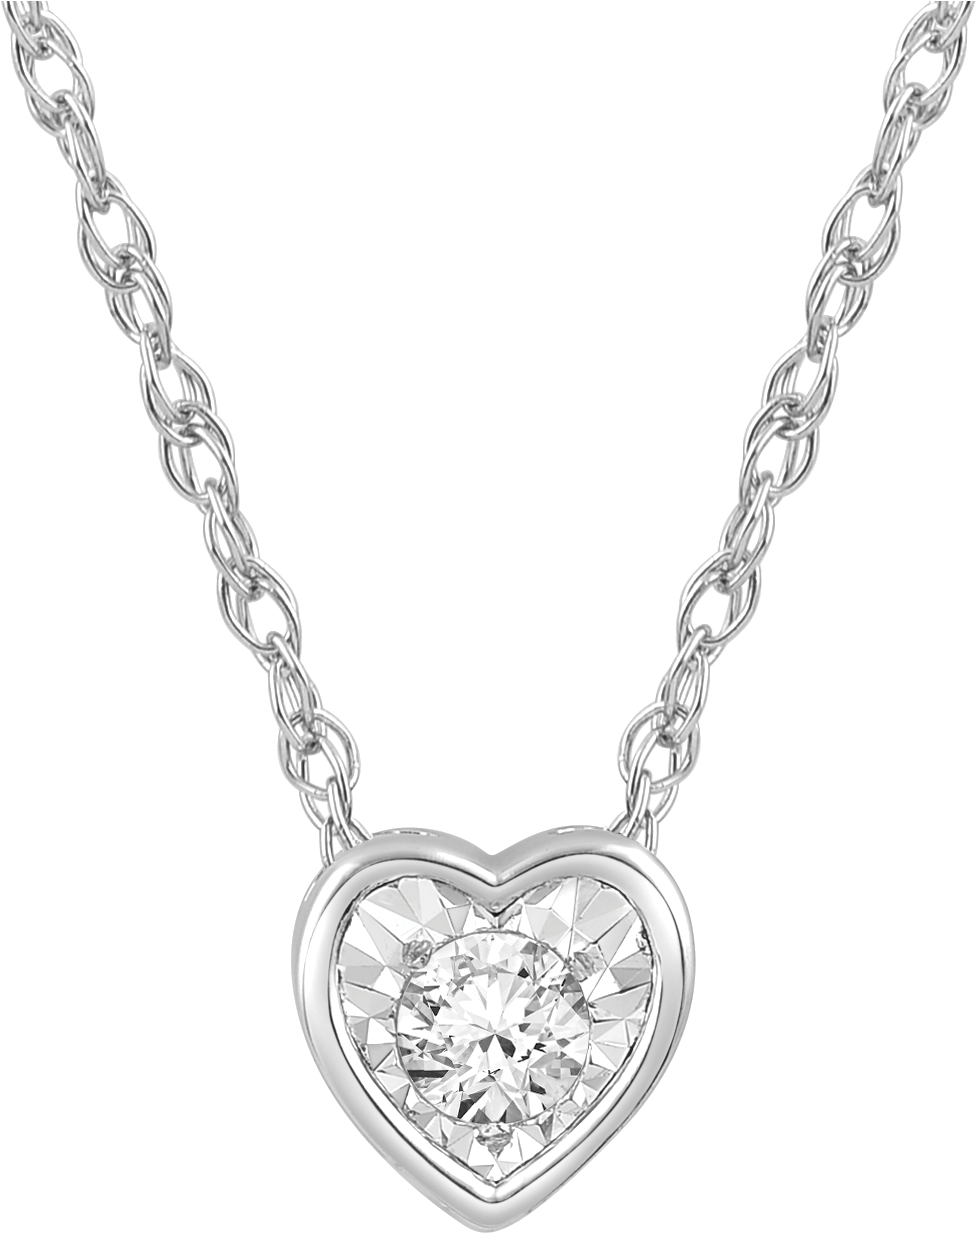 A Silver Necklace With A Diamond In The Shape Of A Heart